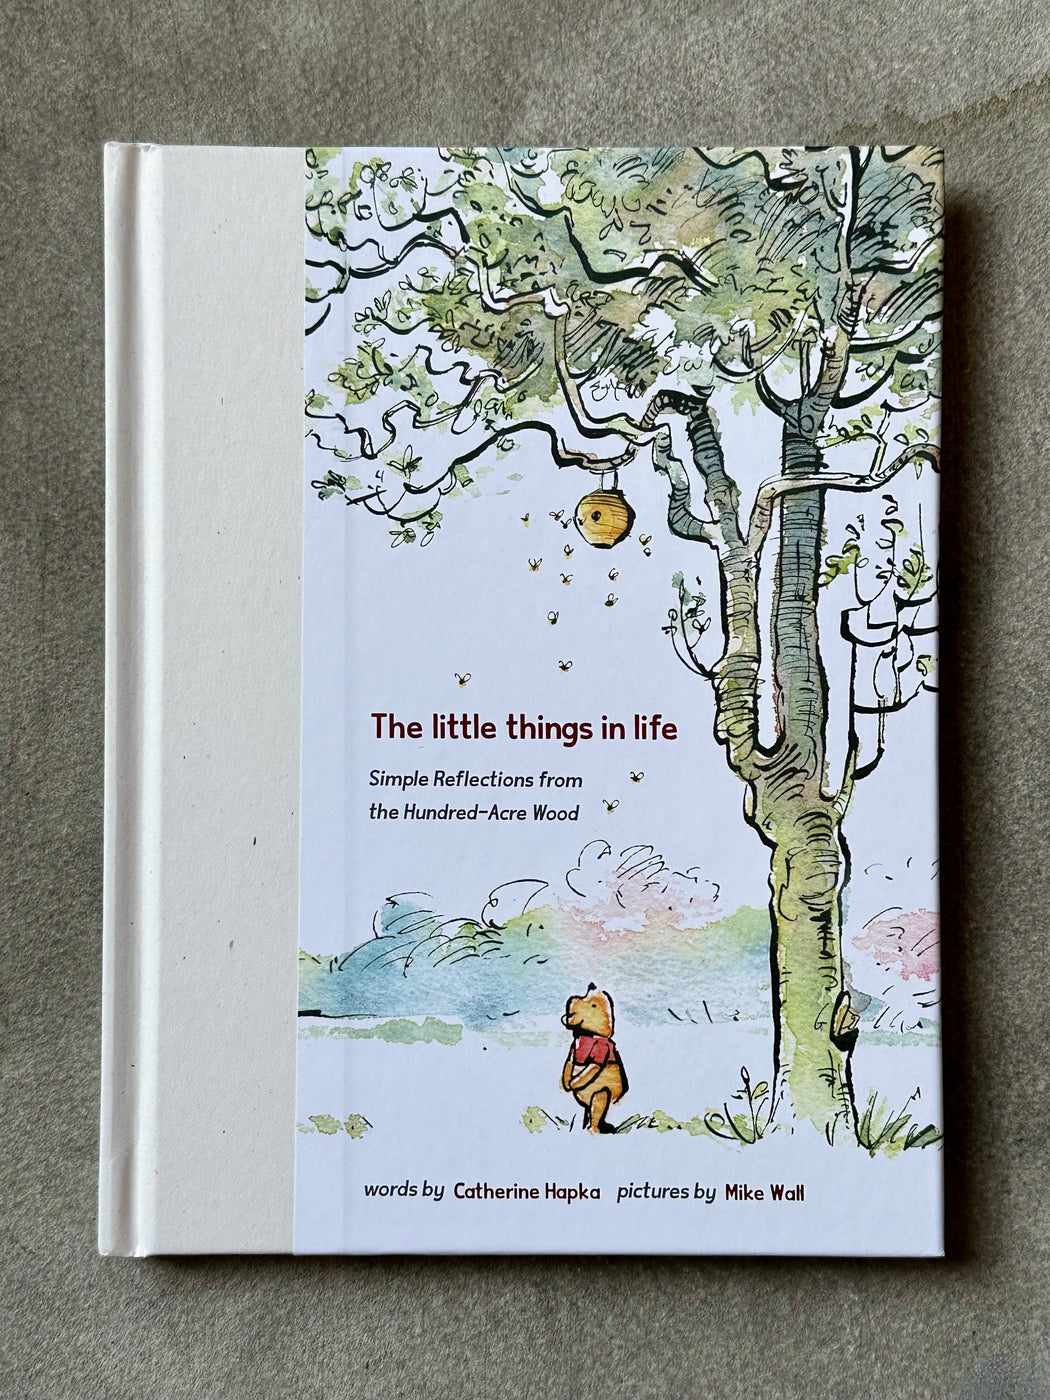 "The Little Things in Life" by Catherine Hapka and Mike Wall